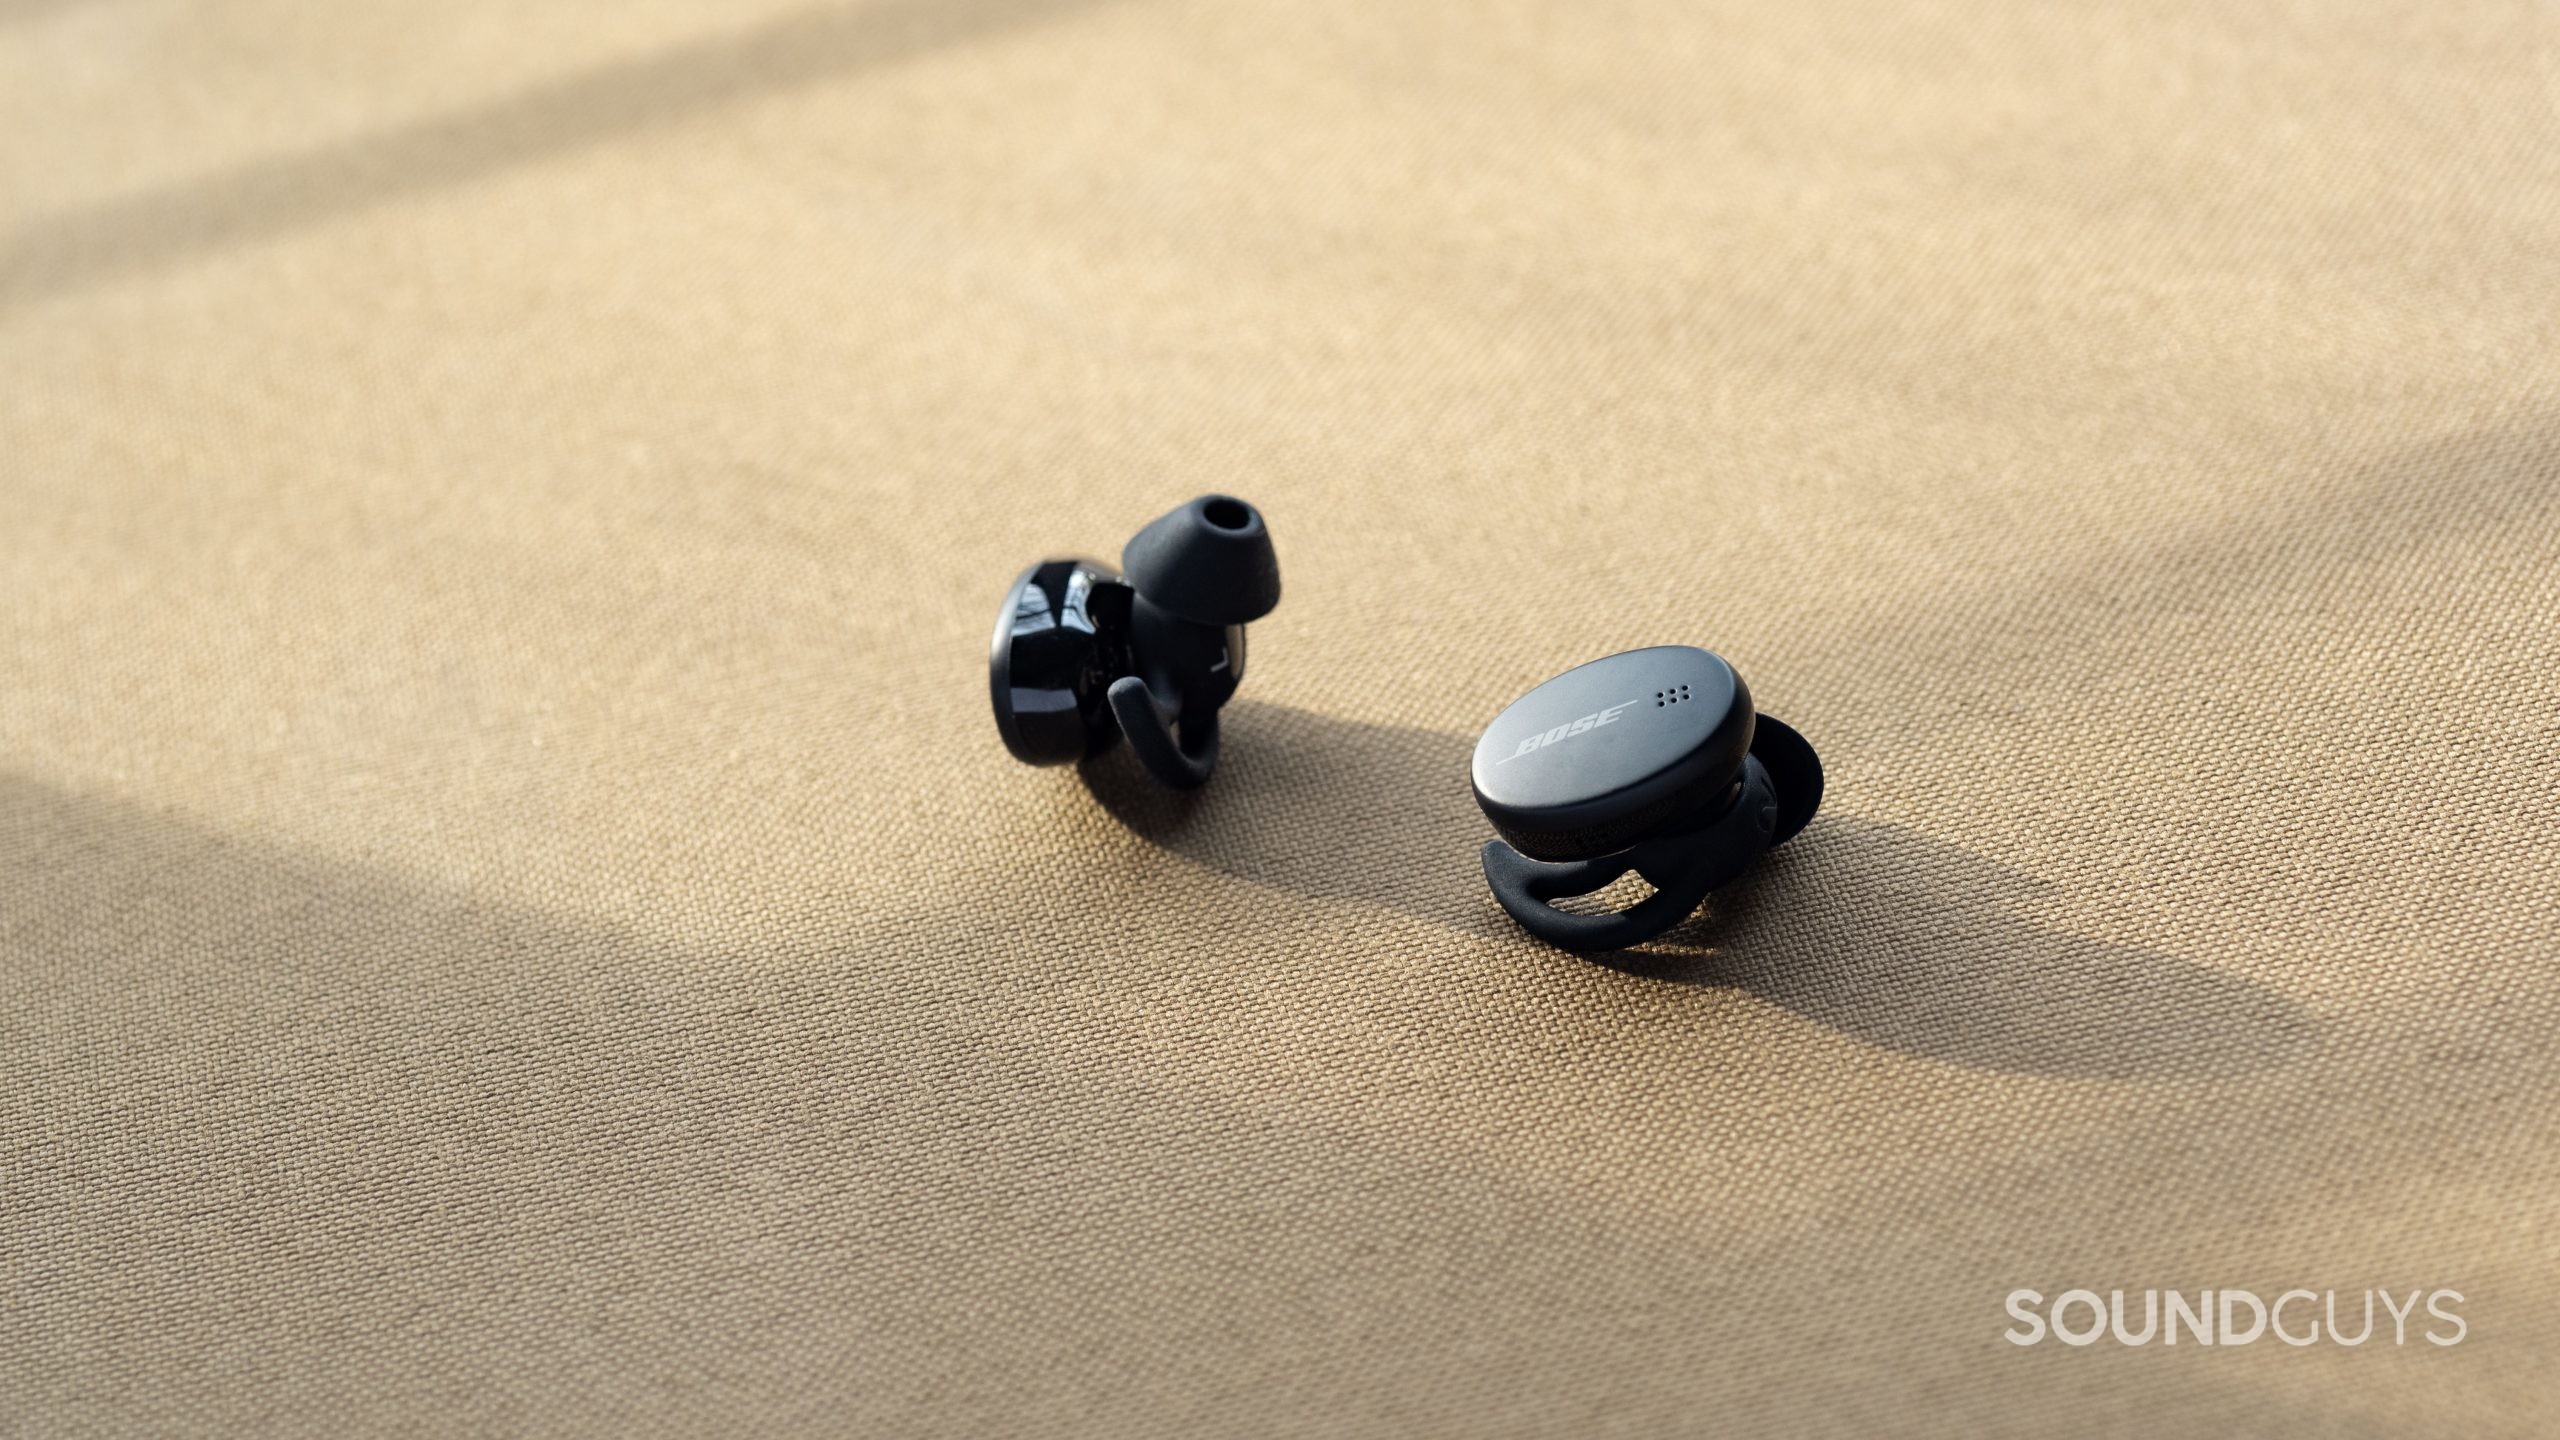 Bose Sport Earbuds review: Great sound and comfort - SoundGuys